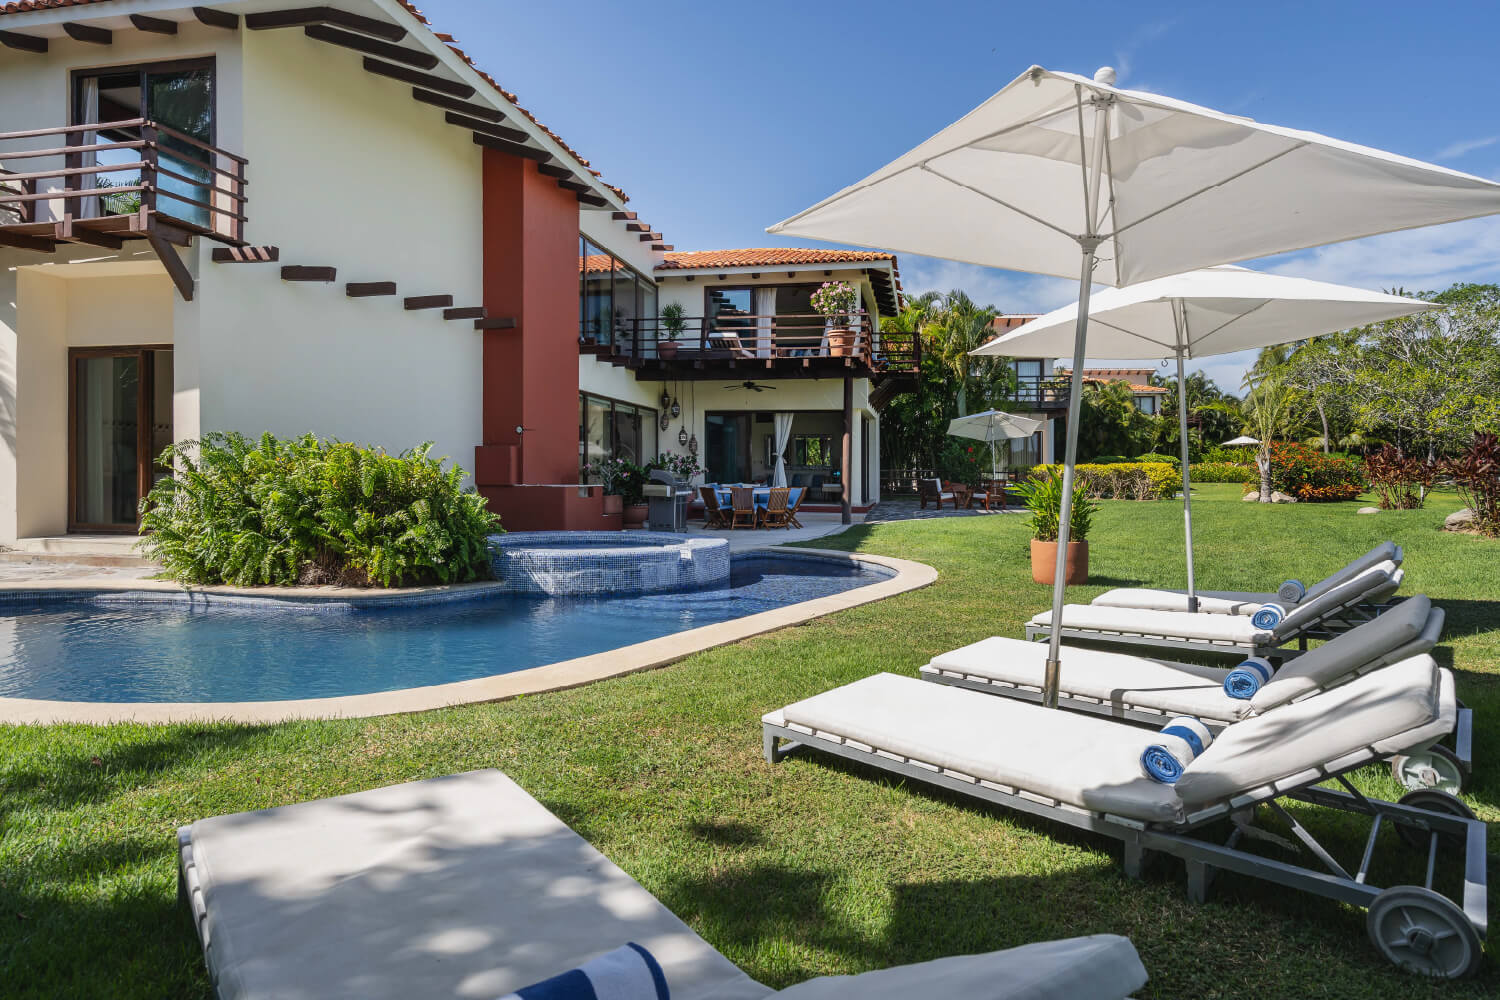 This luxurious villa has a private pool and hot tub.